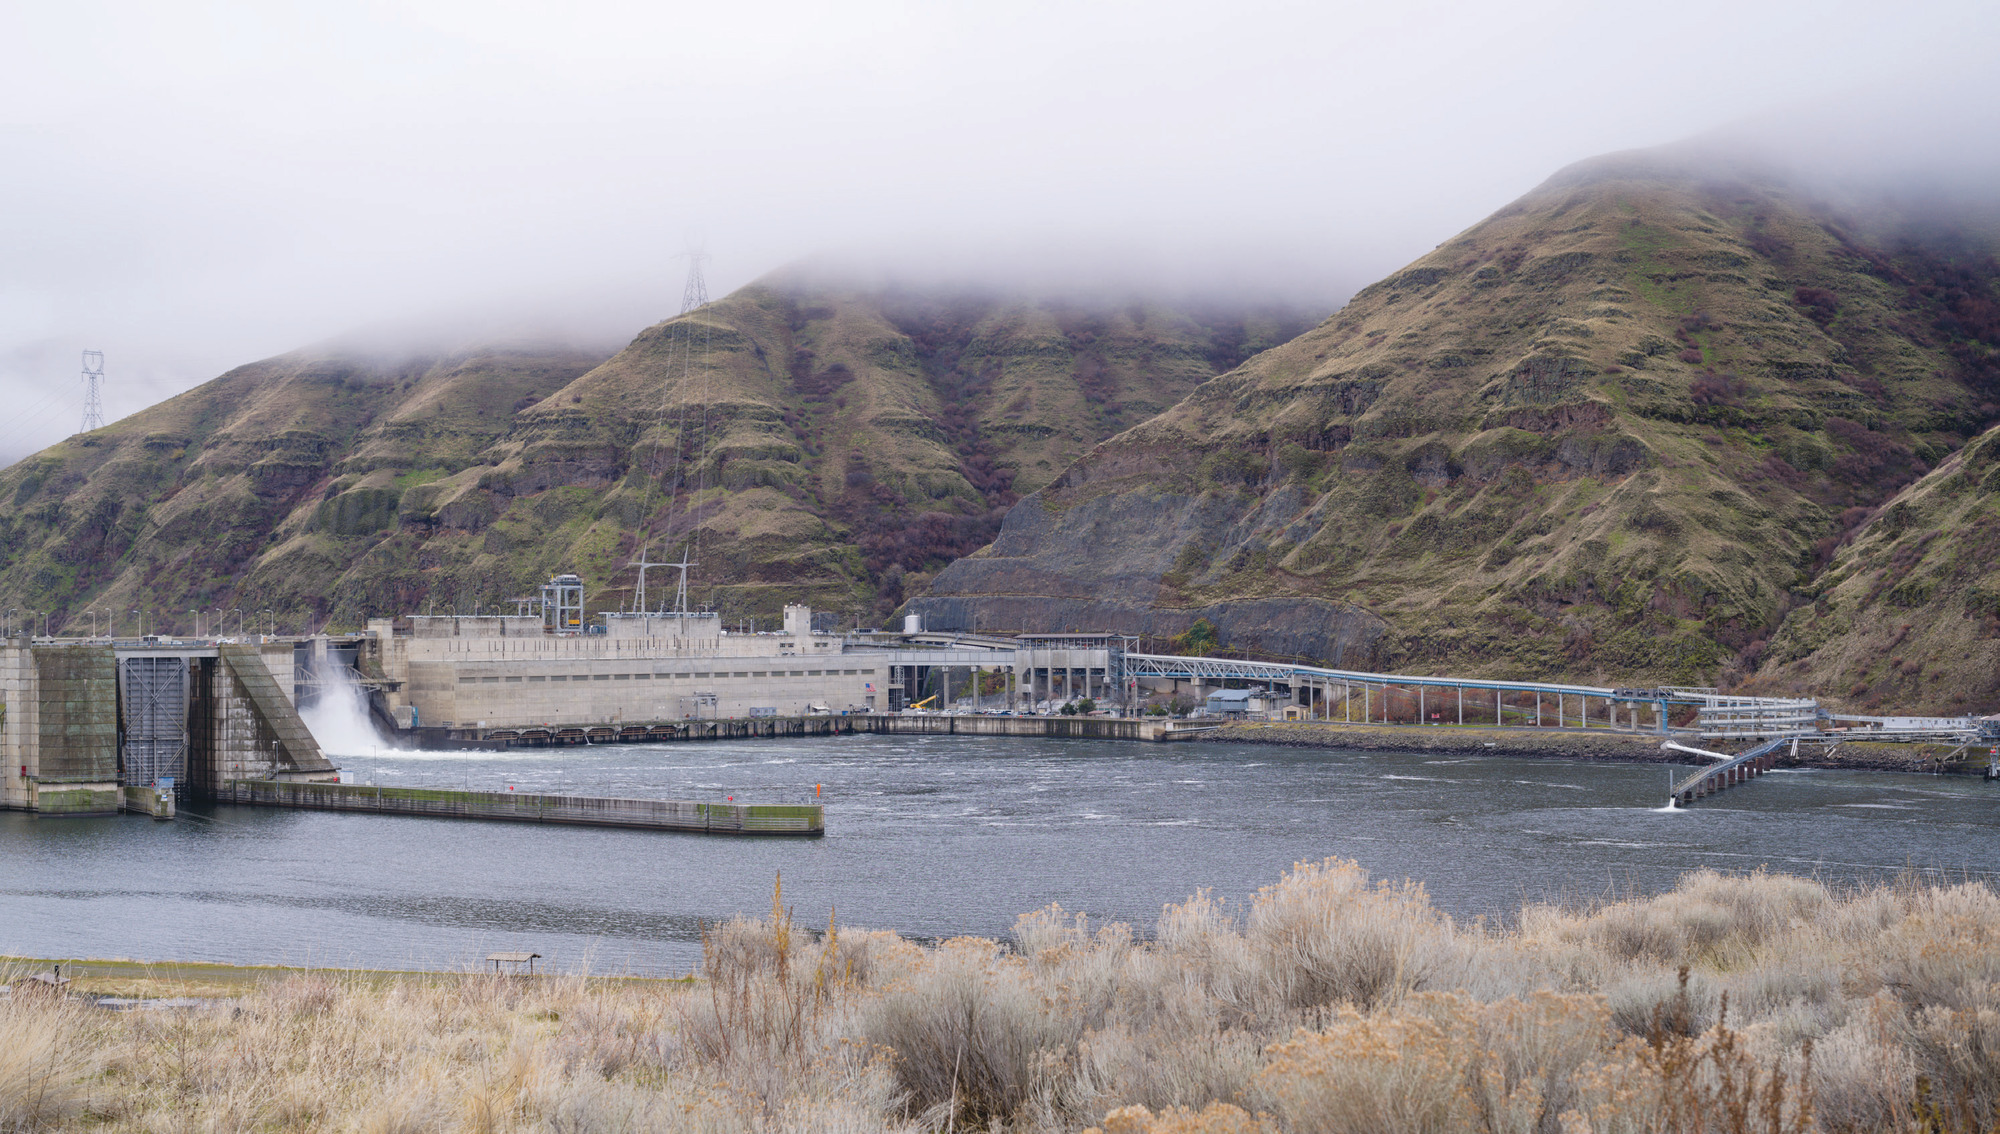 The fish passage facility at Lower Granite Dam moves smolts around the dam and allows researchers to study salmon runs on the Snake River.